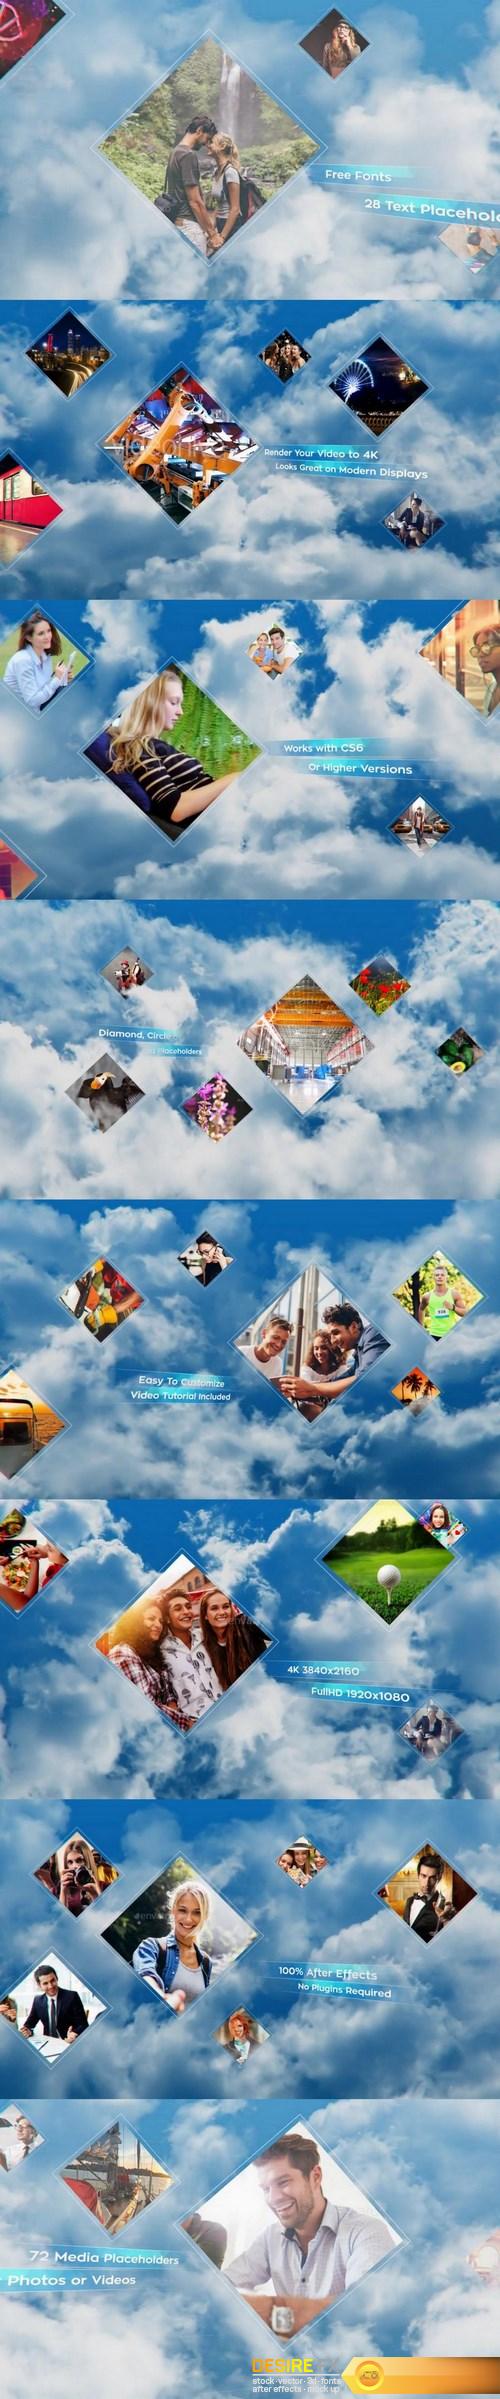 videohive-19890144-timeline-gallery